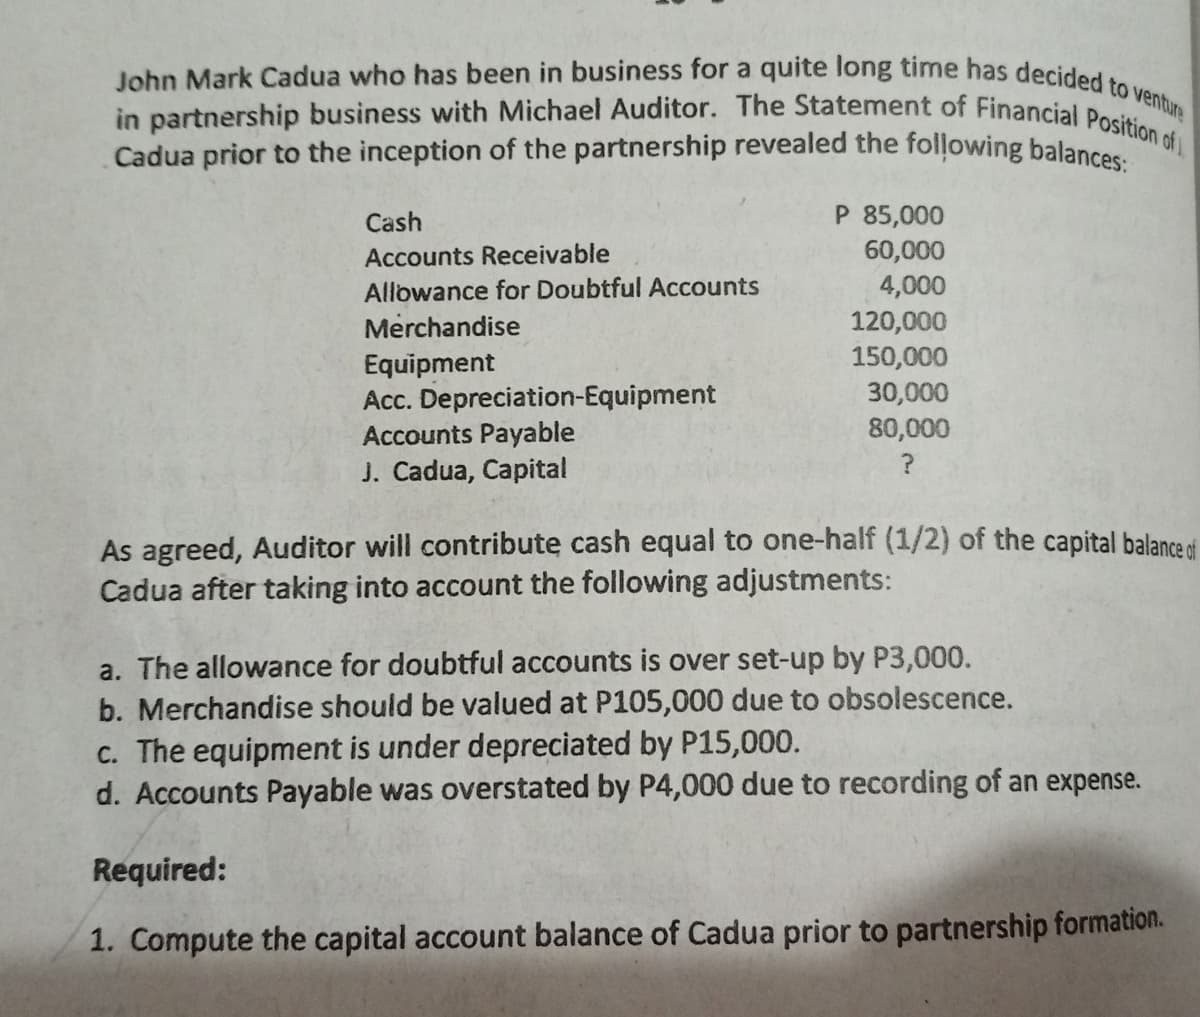 John Mark Cadua who has been in business for a quite long time has decided to venture
in partnership business with Michael Auditor. The Statement of Financial Position of
Cadua prior to the inception of the partnership revealed the folļowing balances
Cash
P 85,000
Accounts Receivable
60,000
4,000
120,000
150,000
30,000
80,000
Allowance for Doubtful Accounts
Merchandise
Equipment
Acc. Depreciation-Equipment
Accounts Payable
J. Cadua, Capital
As agreed, Auditor will contribute cash equal to one-half (1/2) of the capital balance ei
Cadua after taking into account the following adjustments:
a. The allowance for doubtful accounts is over set-up by P3,000.
b. Merchandise should be valued at P105,000 due to obsolescence.
c. The equipment is under depreciated by P15,000.
d. Accounts Payable was overstated by P4,000 due to recording of an expense.
Required:
1. Compute the capital account balance of Cadua prior to partnership formation.
